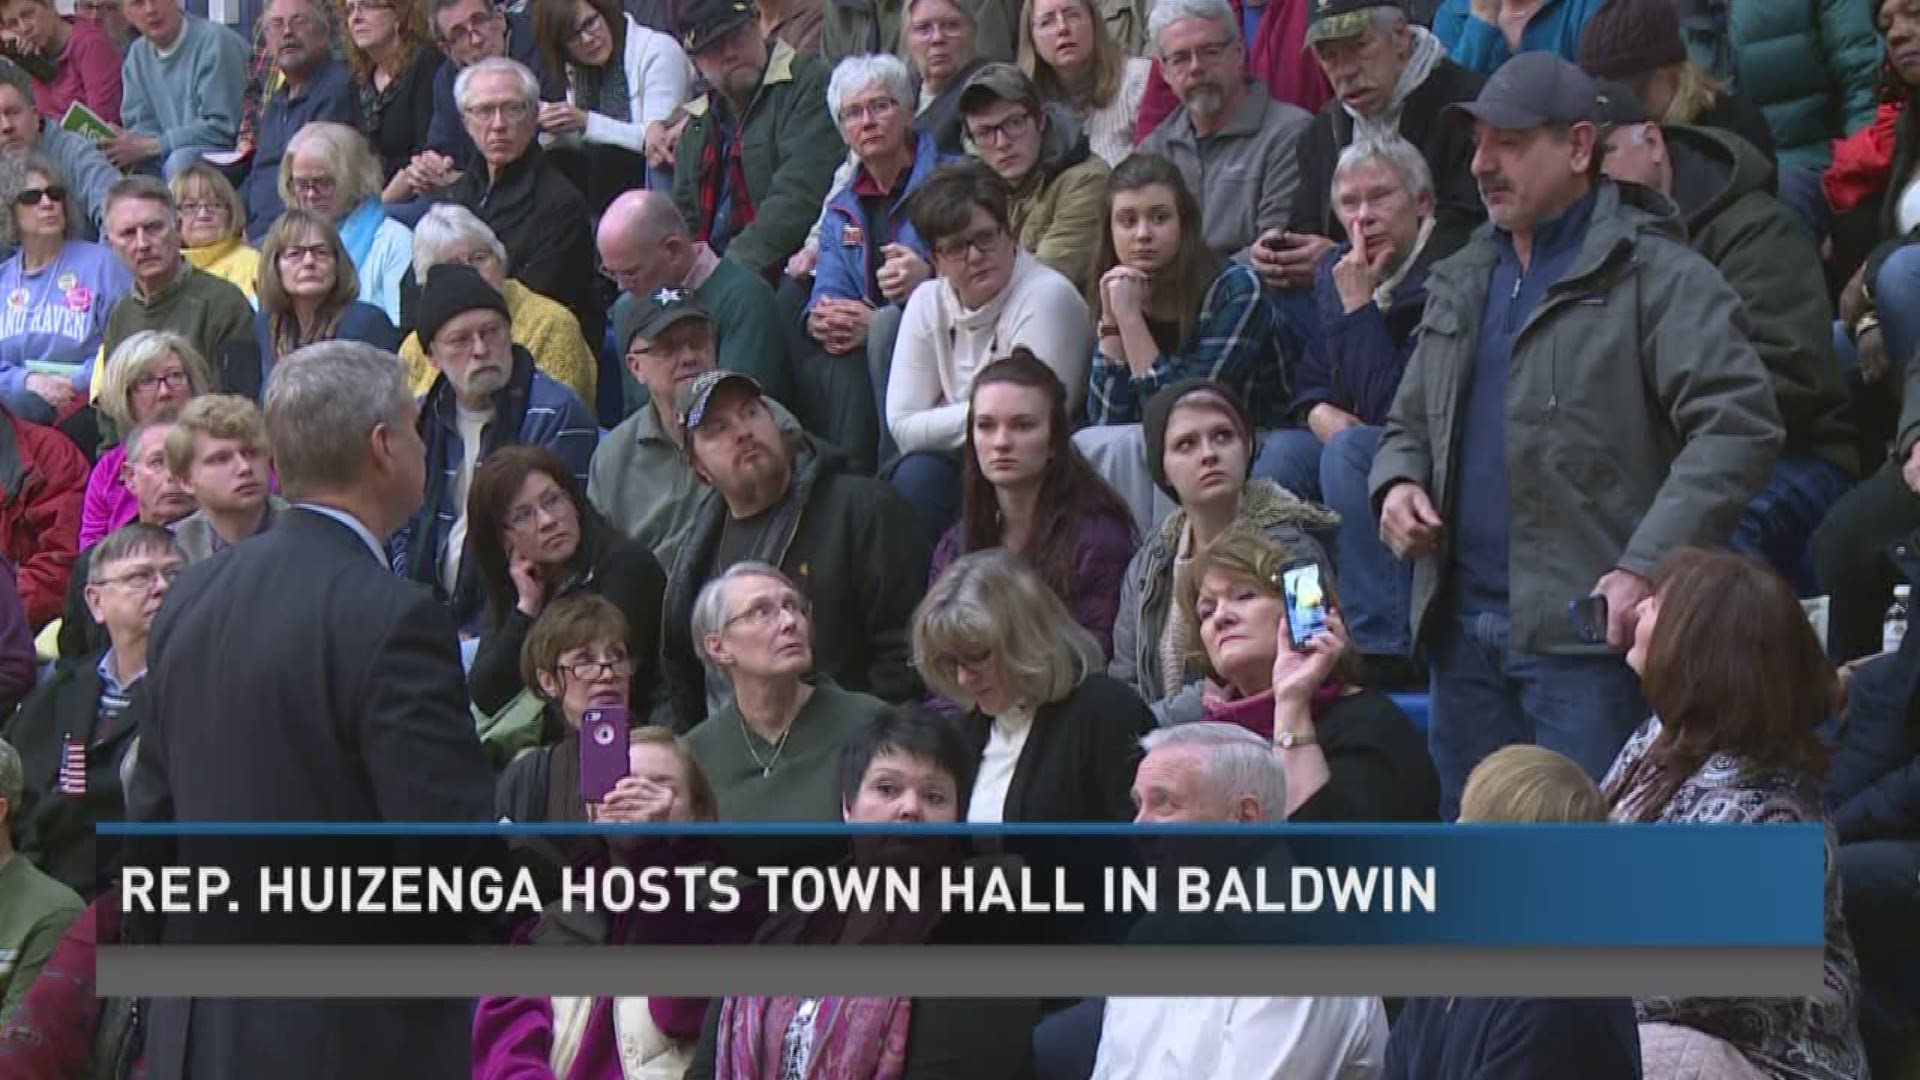 It was a full house for a town hall in Baldwin today as Republican Congressman Bill Huizenga took questions from a lively crowd.